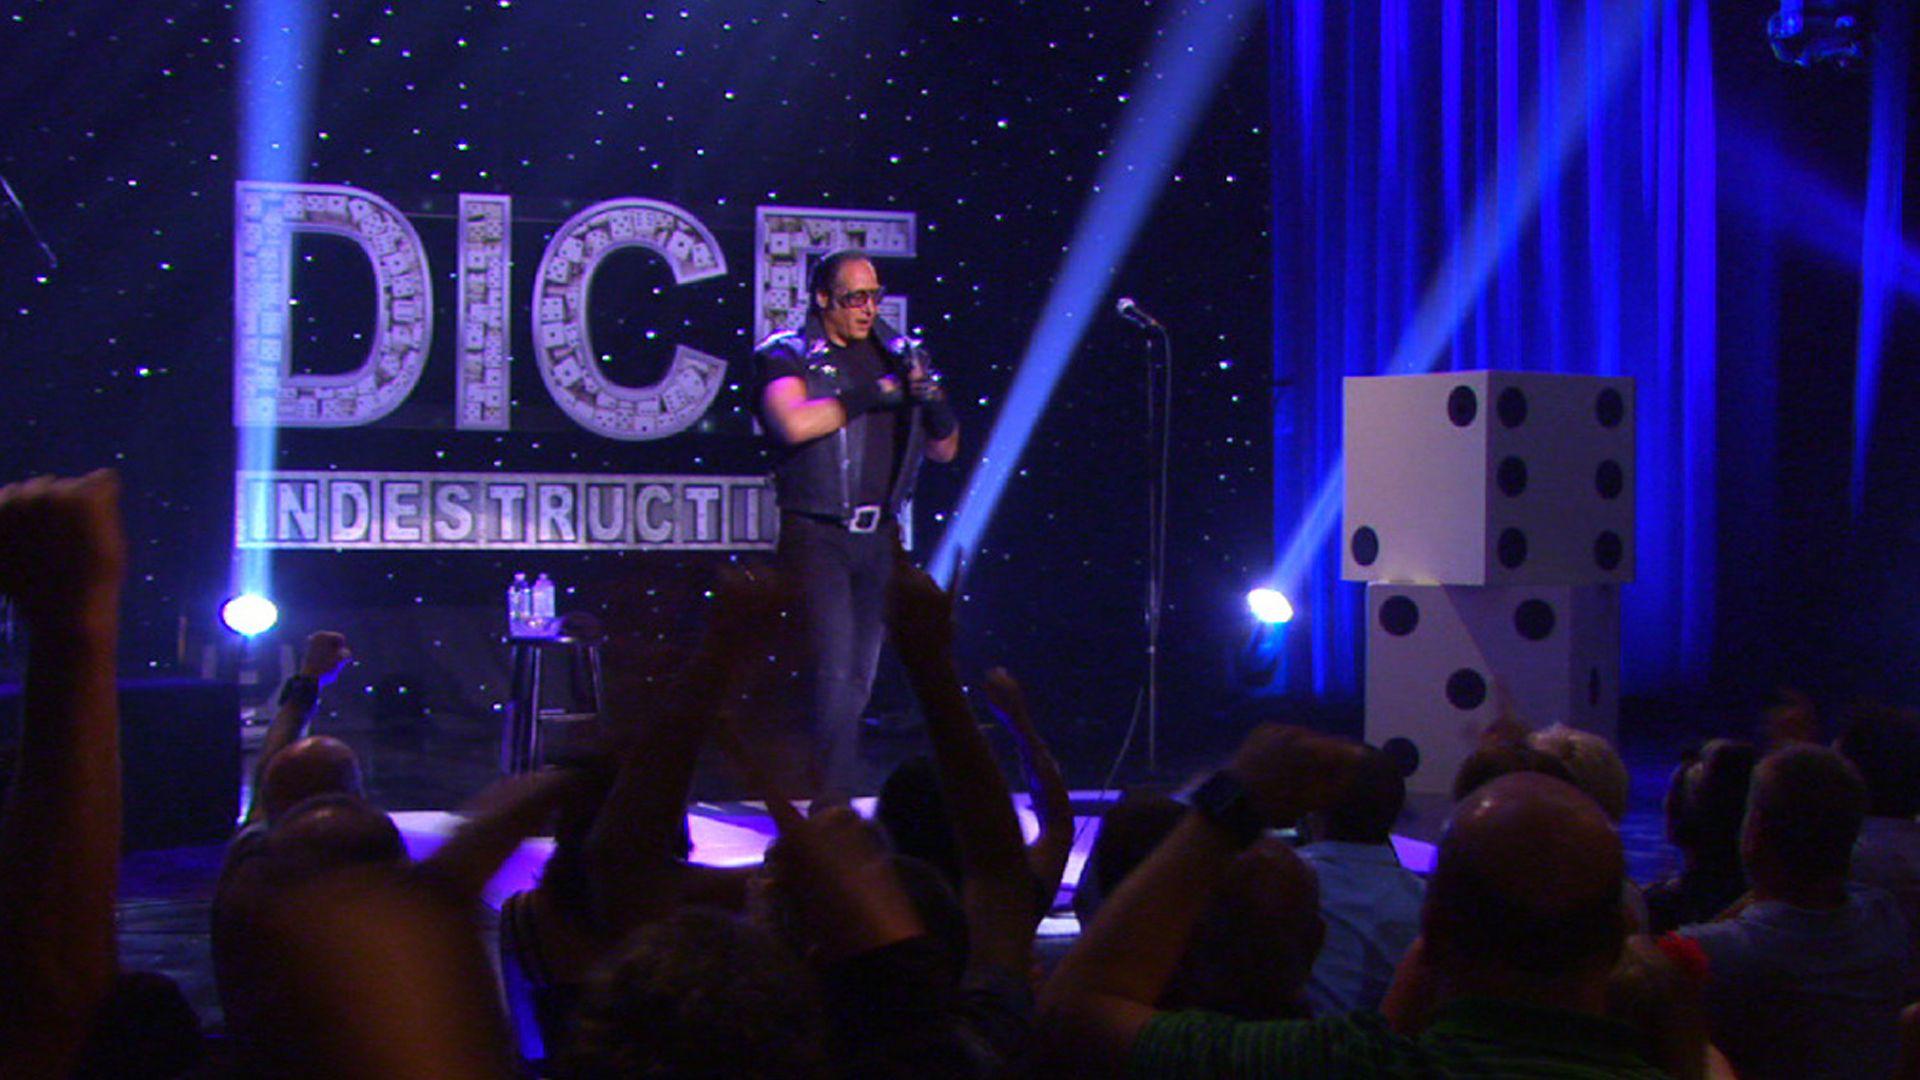 Andrew Dice Clay: Indestructible Backdrop